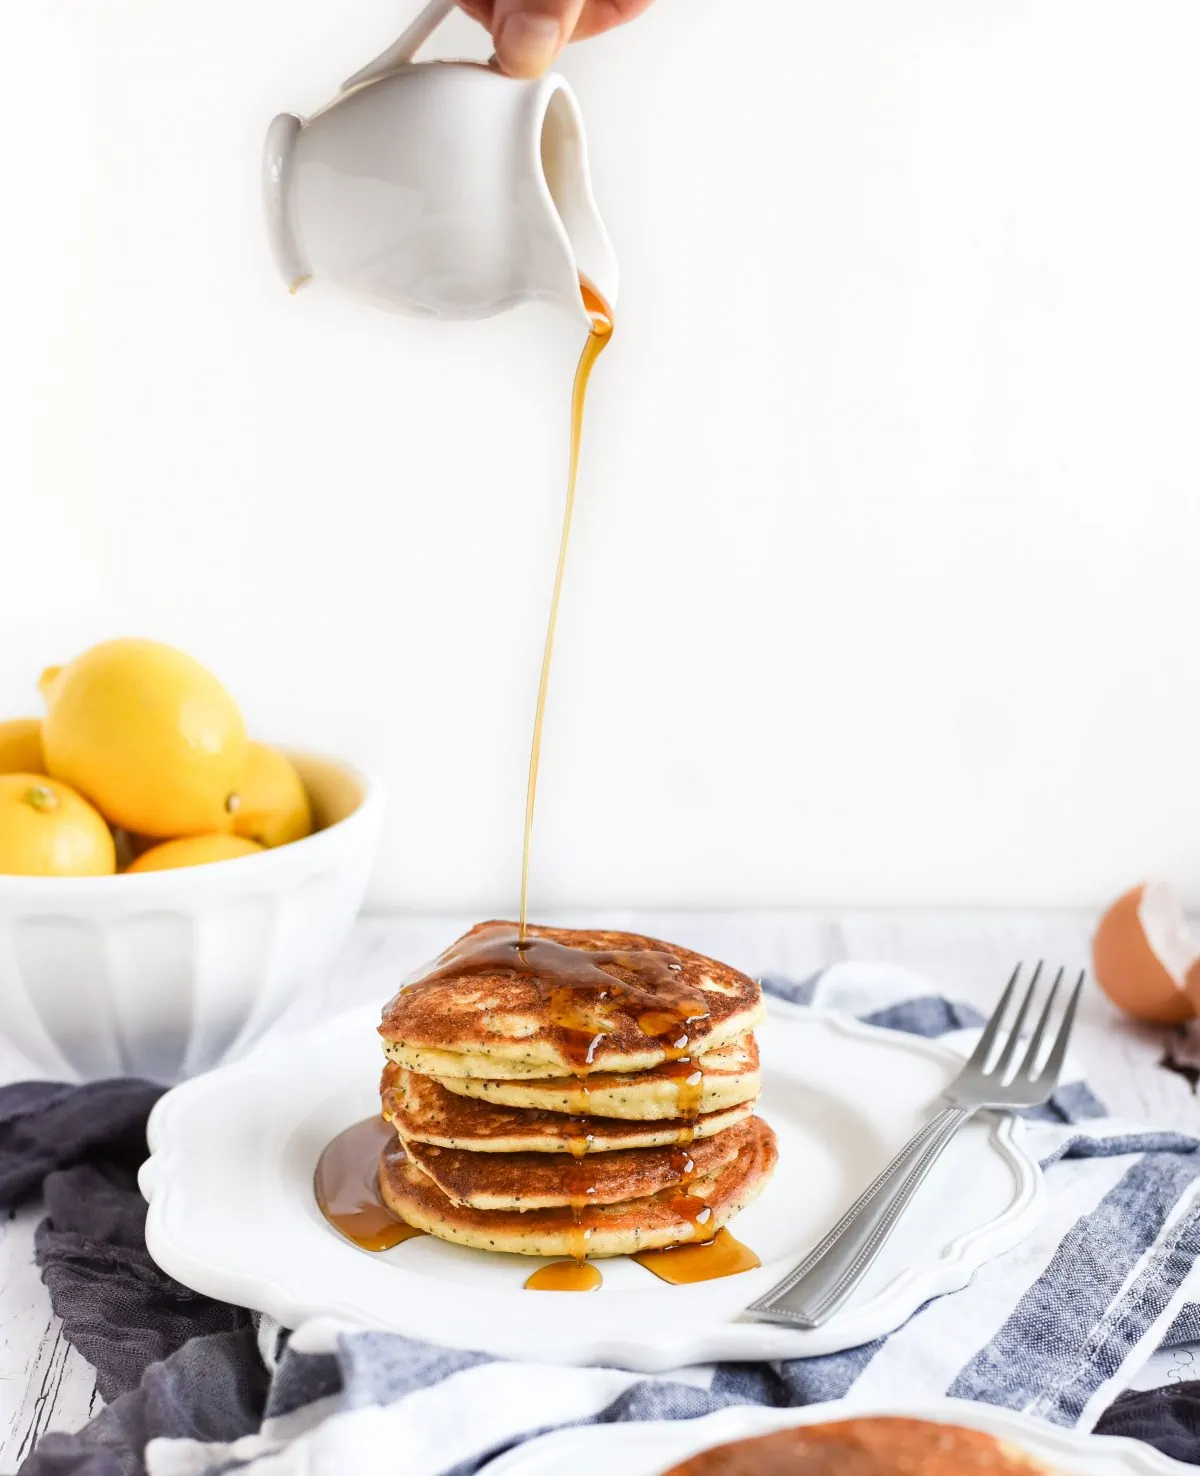 Lemon poppy seed pancakes with syrup drizzled on top picture